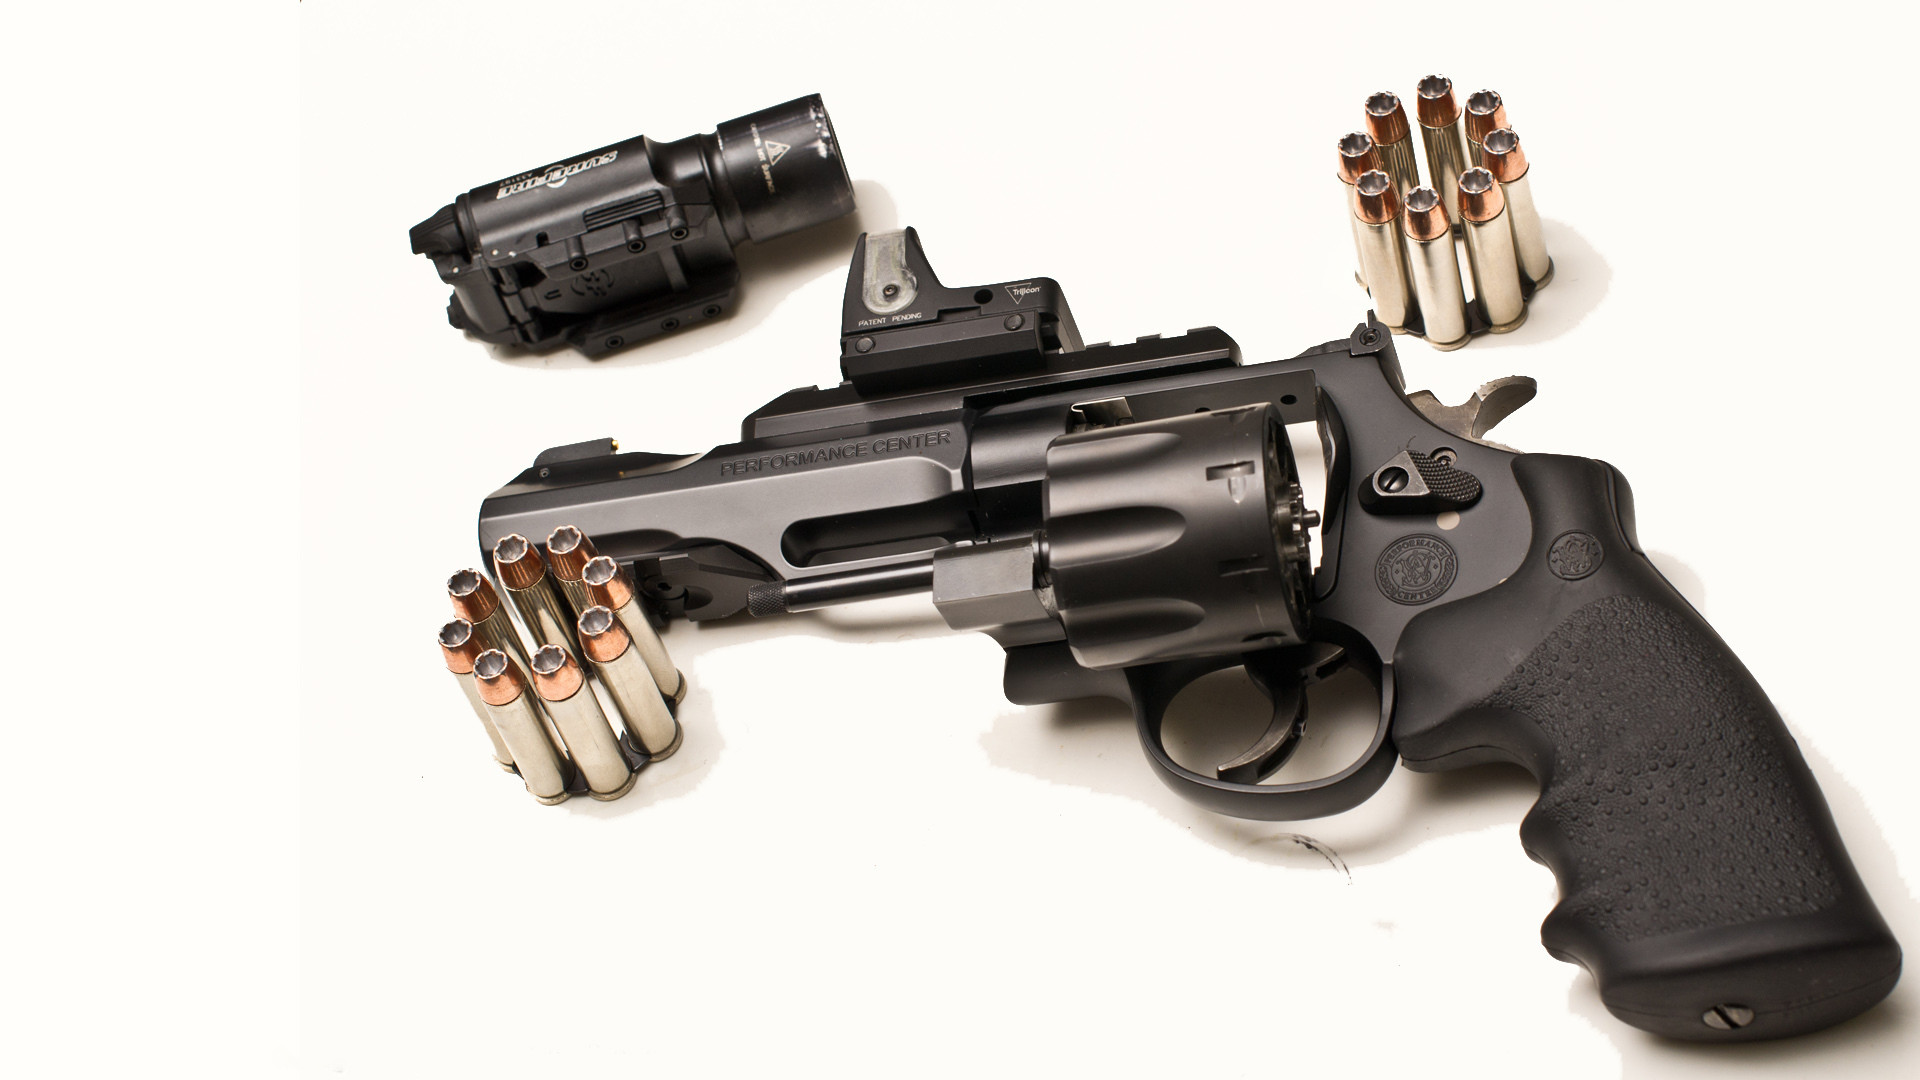 1920x1080 Image Pistols Cartridge (firearms) Revolver smith and wesson 327 trr8